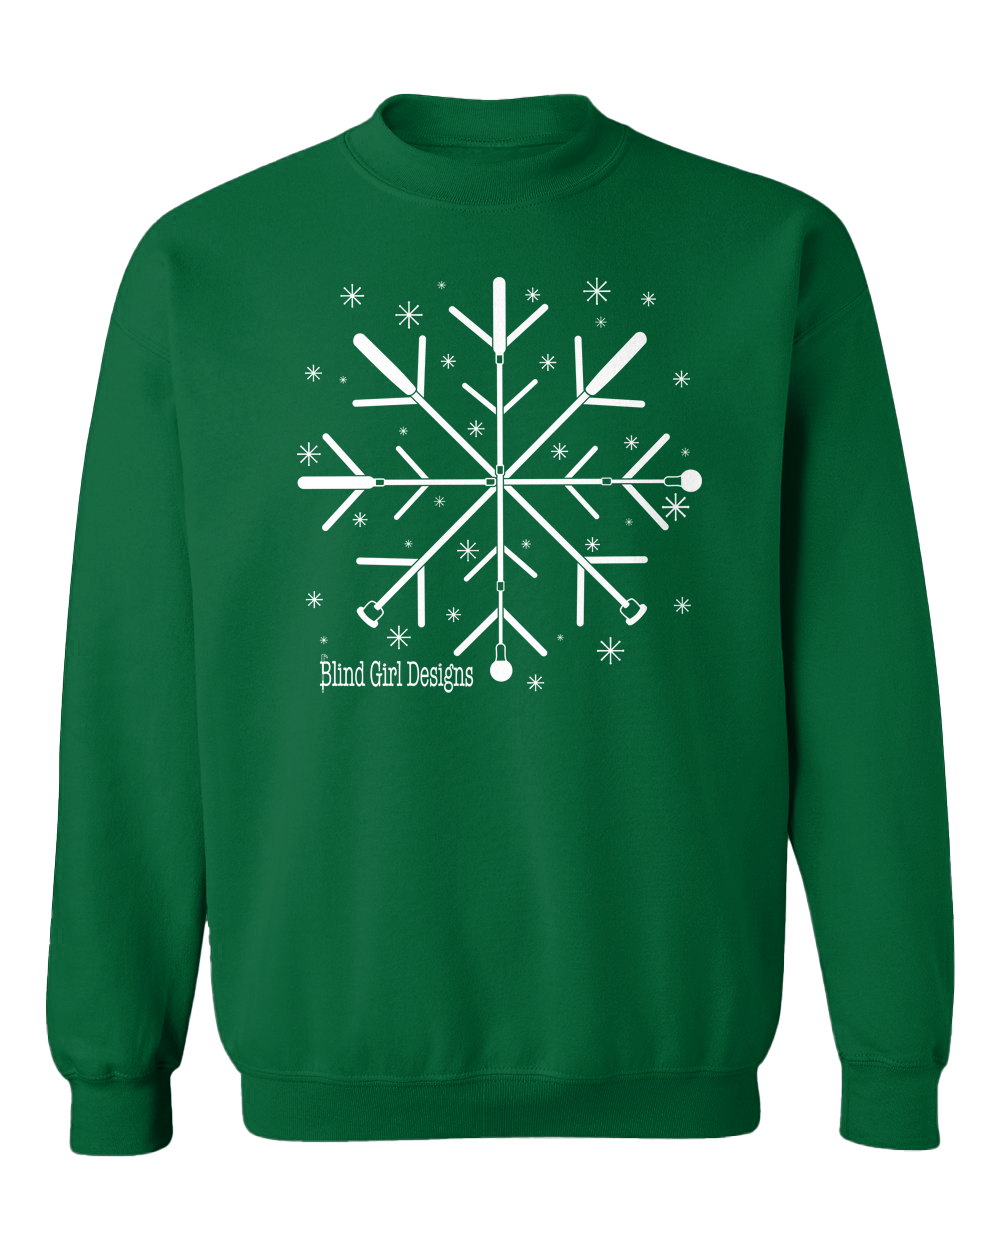 New 3D! Super Tactile Snowflake White Cane Crew Sweatshirt - Deep Forest Green